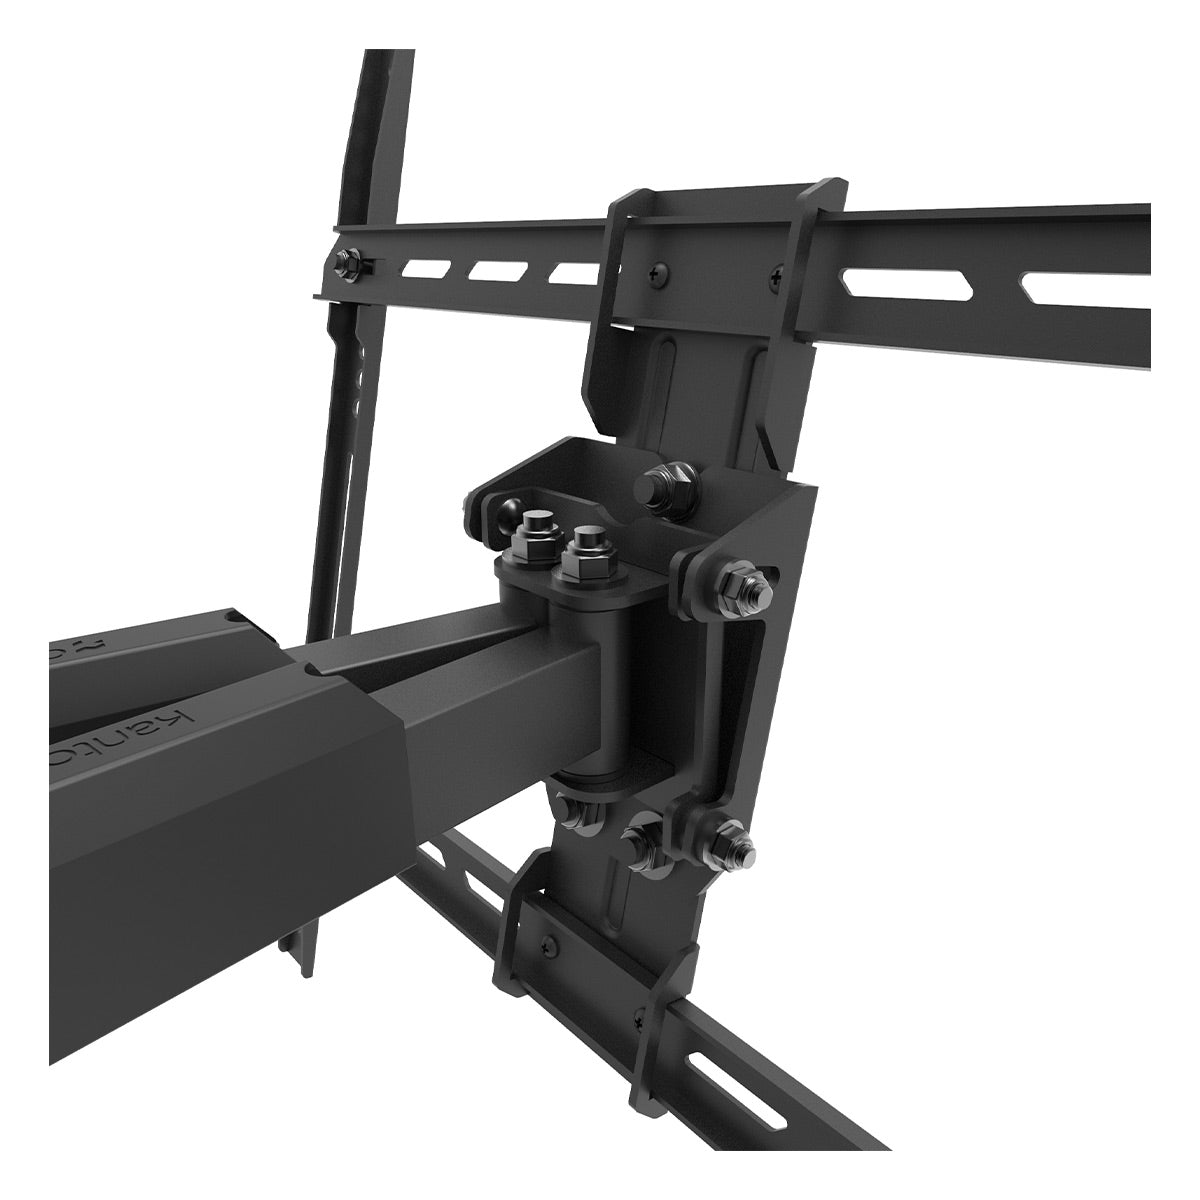 Kanto LX600SW Full-Motion Metal Stud Mount with SNAPTOGGLE&reg; Heavy-Duty Toggle Bolts for 34" - 65" TVs